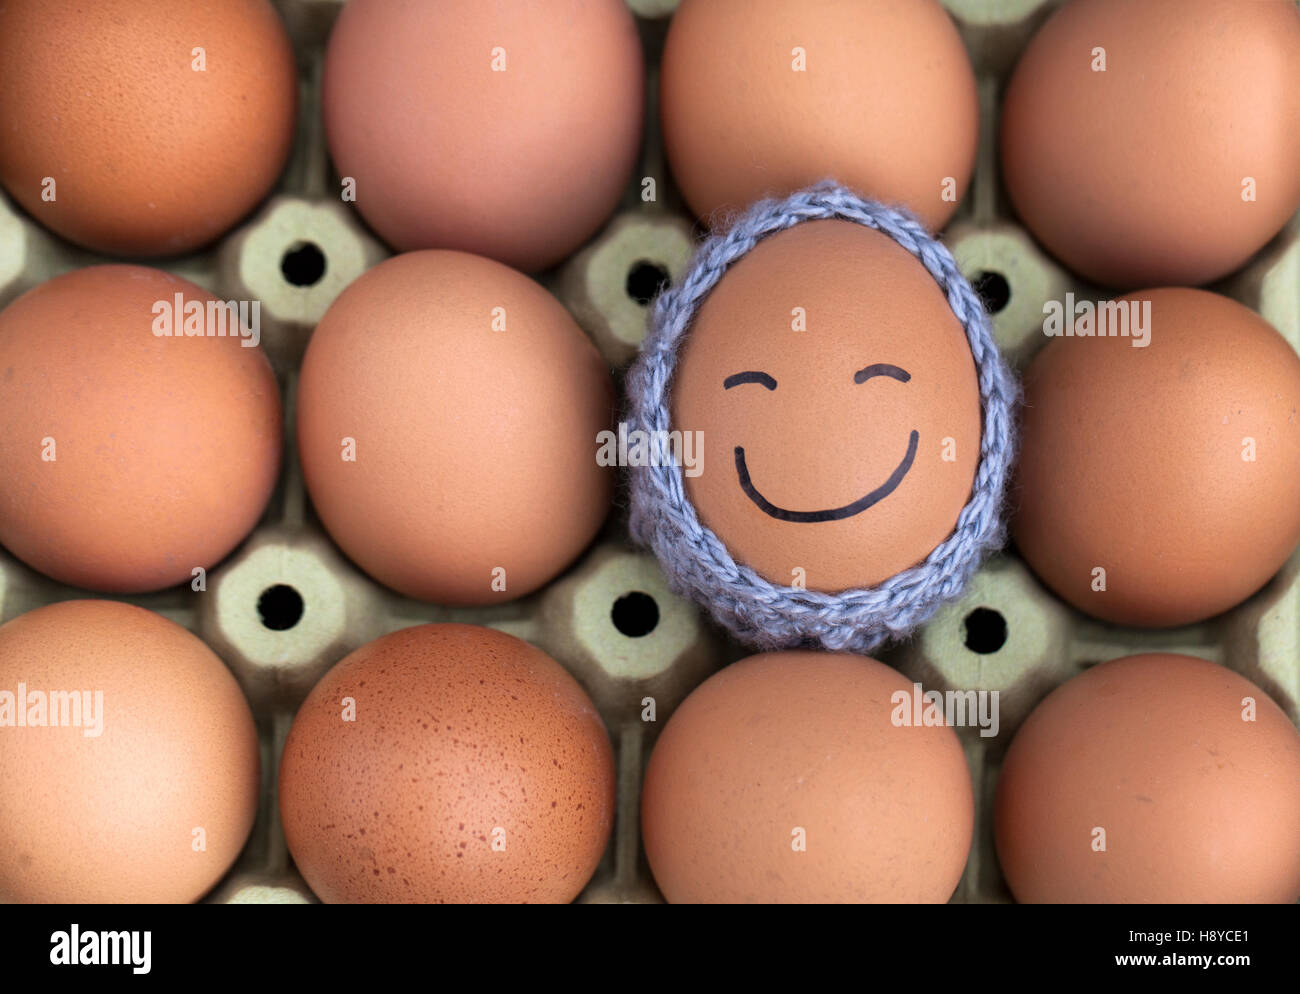 Smiling egg wearing a knitted hat souronded by blank brown eggs. Stock Photo